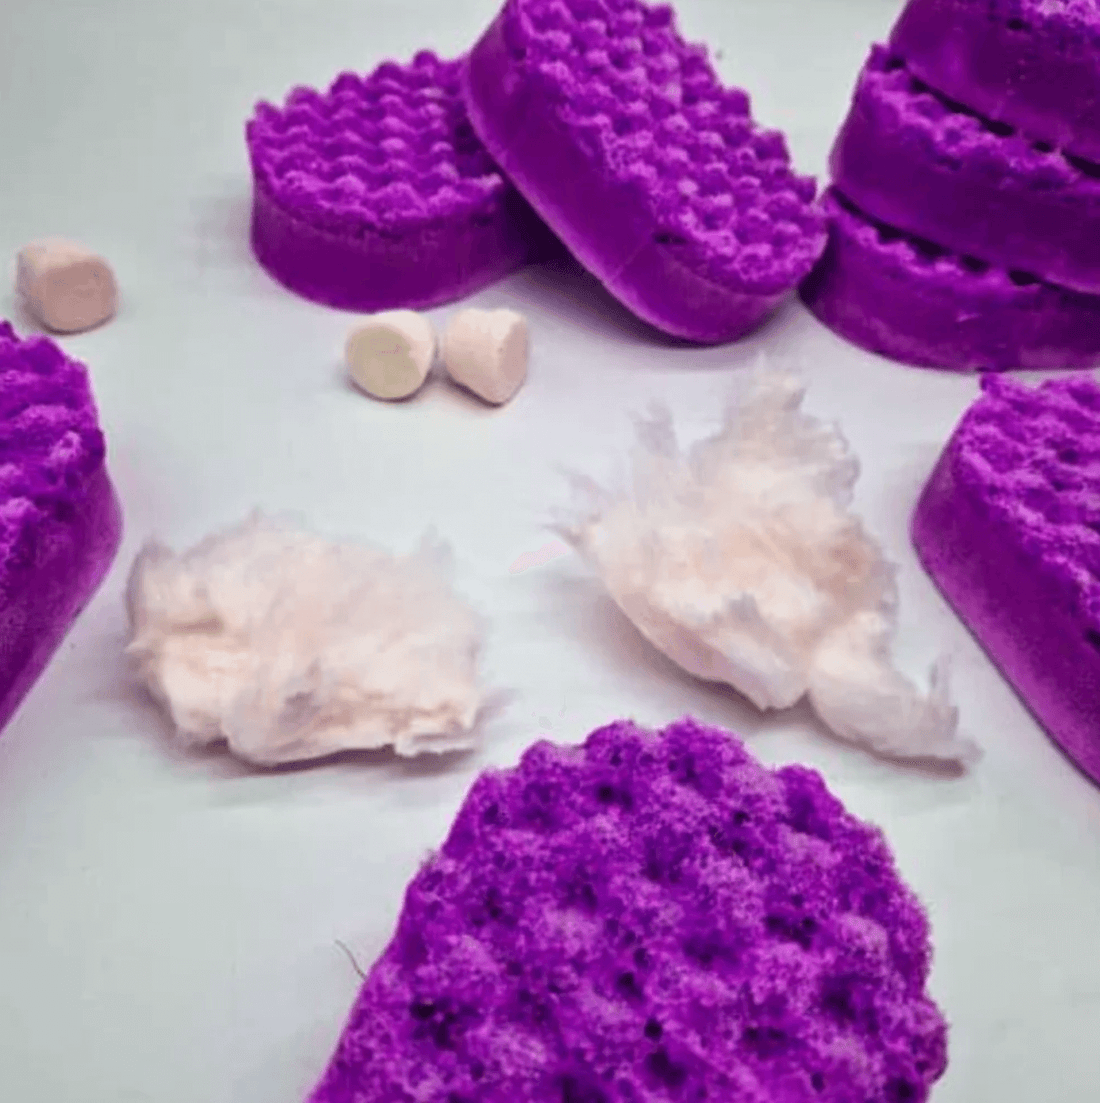 Candyfloss and Marshmallow Soap Sponge